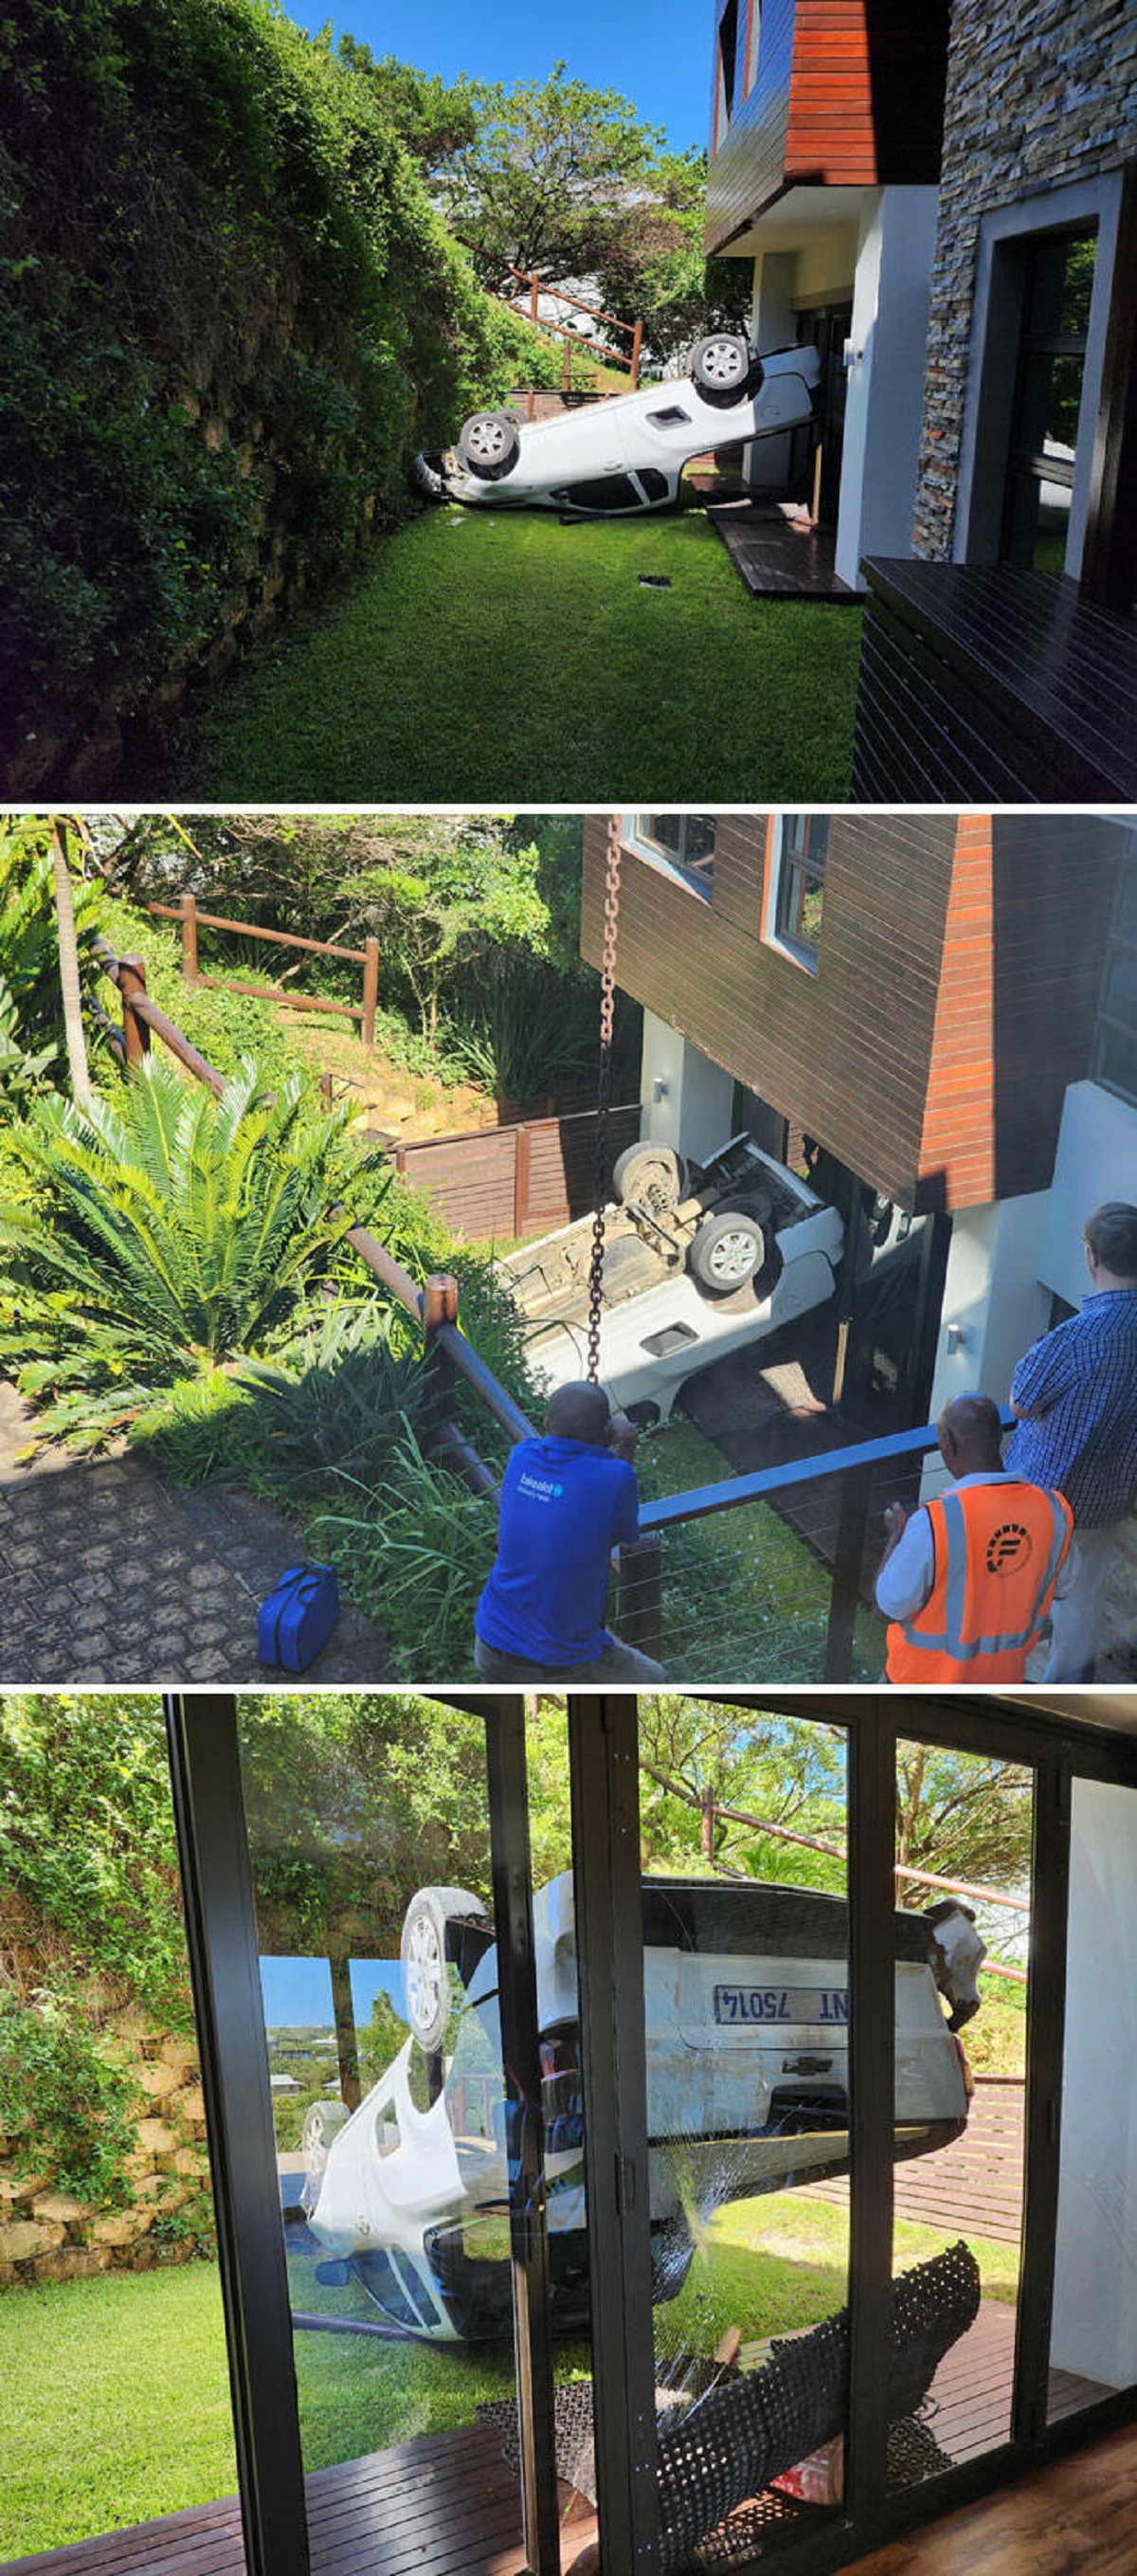 "A Delivery Guy Forgot To Use His Handbrake On Our Steep Driveway. His Car Rolled Over The Ledge And Garden, Then Fell In Front Of Our Living Room About 3-4 Meters Down"